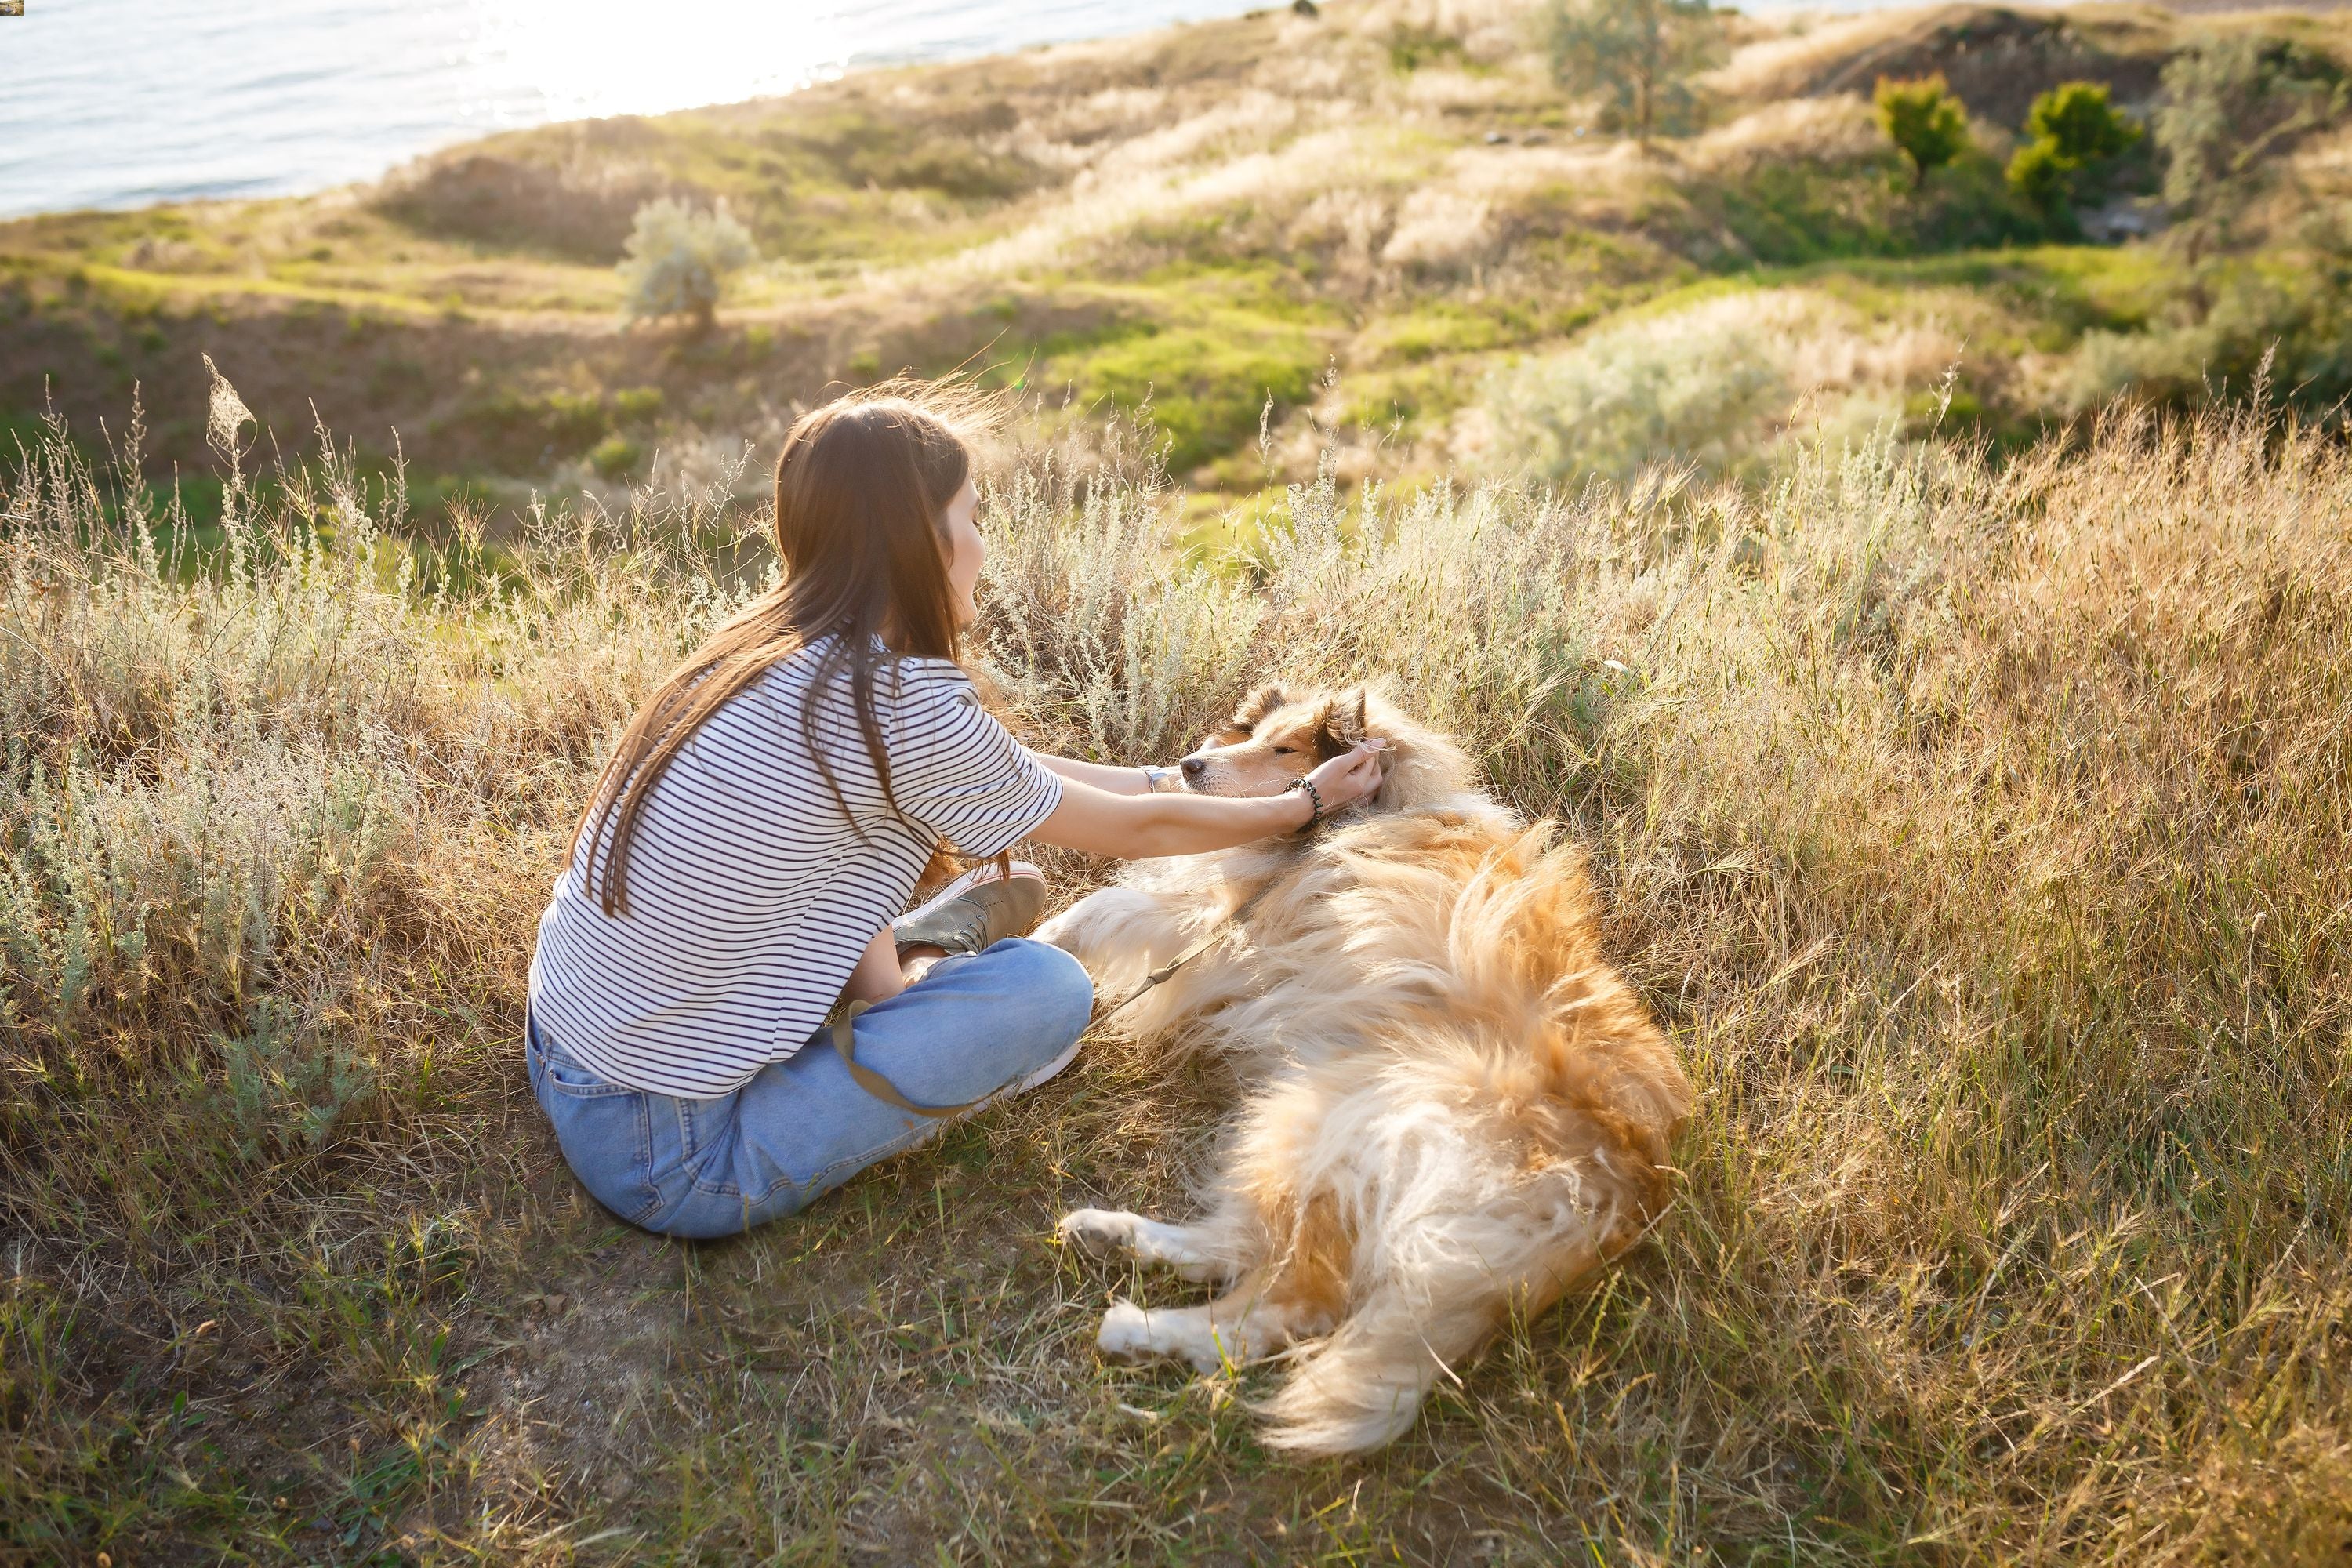 A young woman sitting on a grassy field patting a long furred brown dogs ears while he is lying down on the grass.